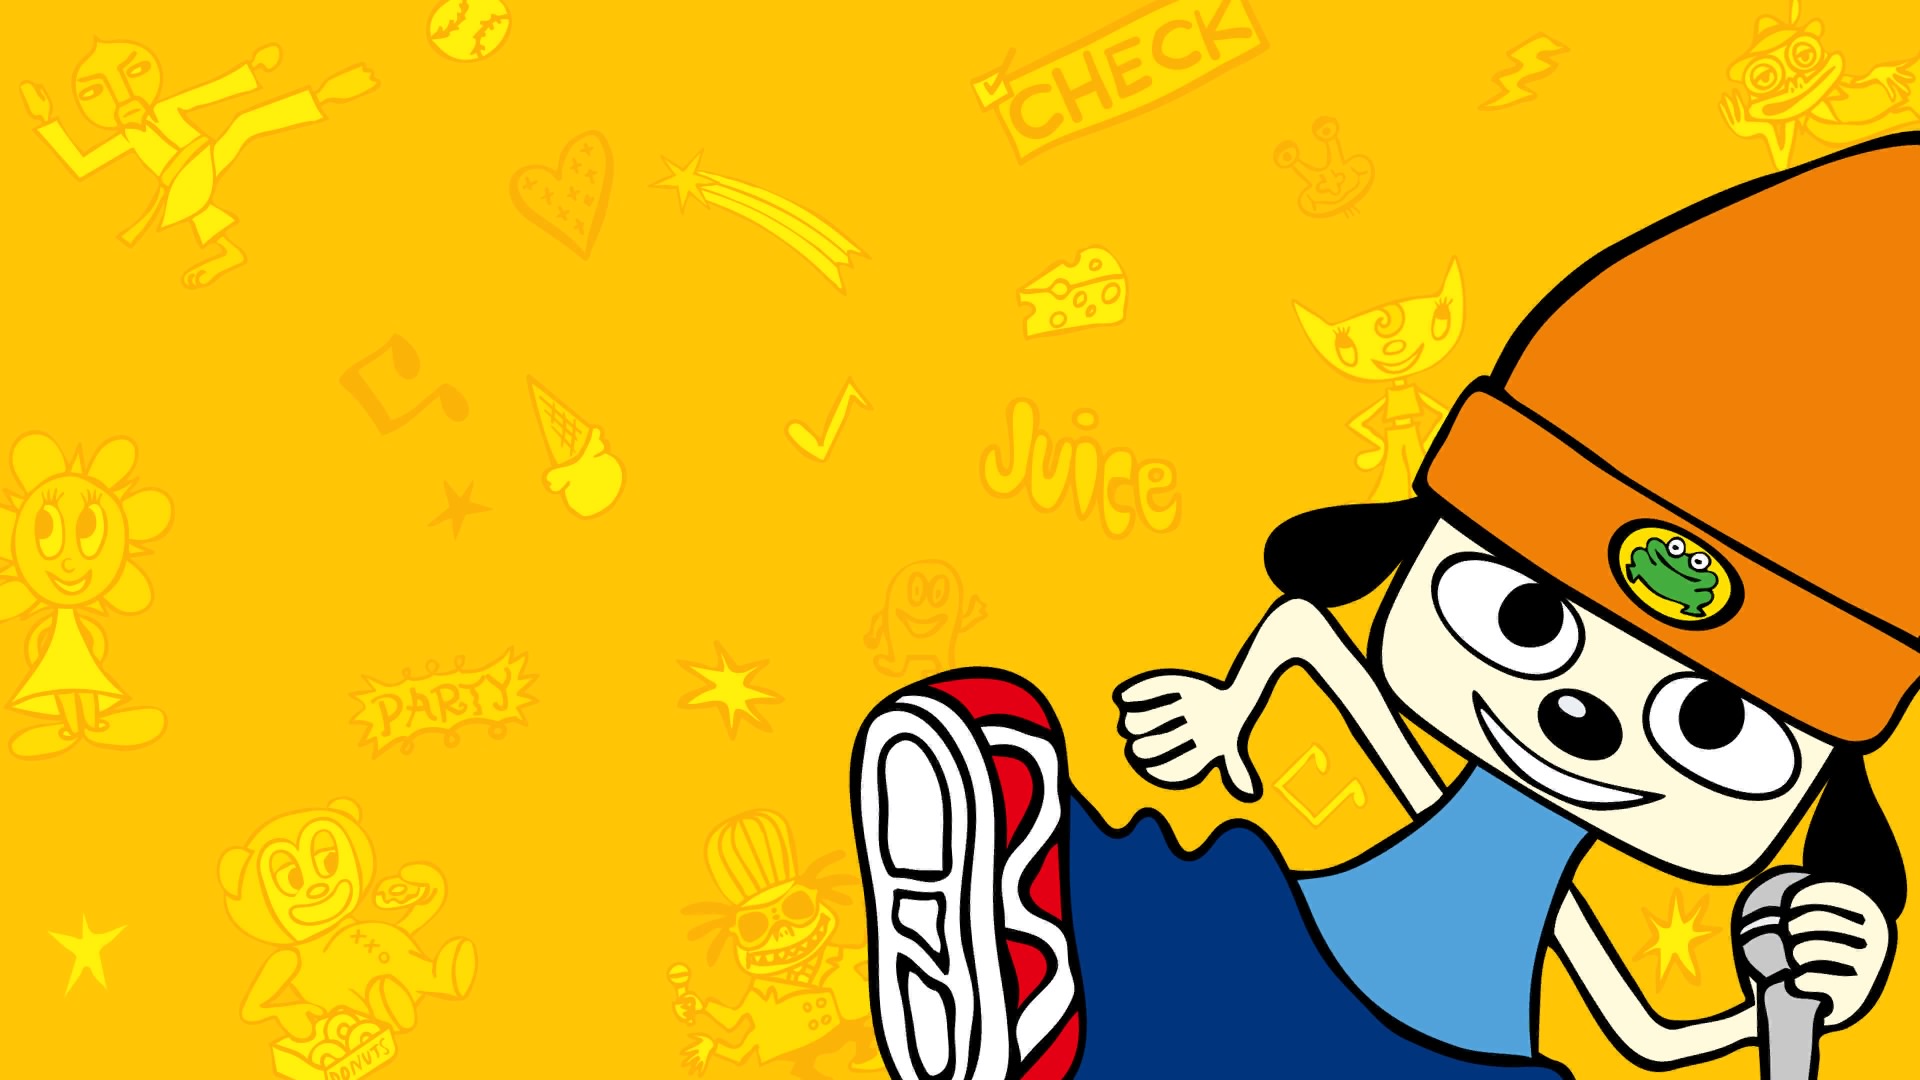 Parappa the Rapper is being remastered for PS4